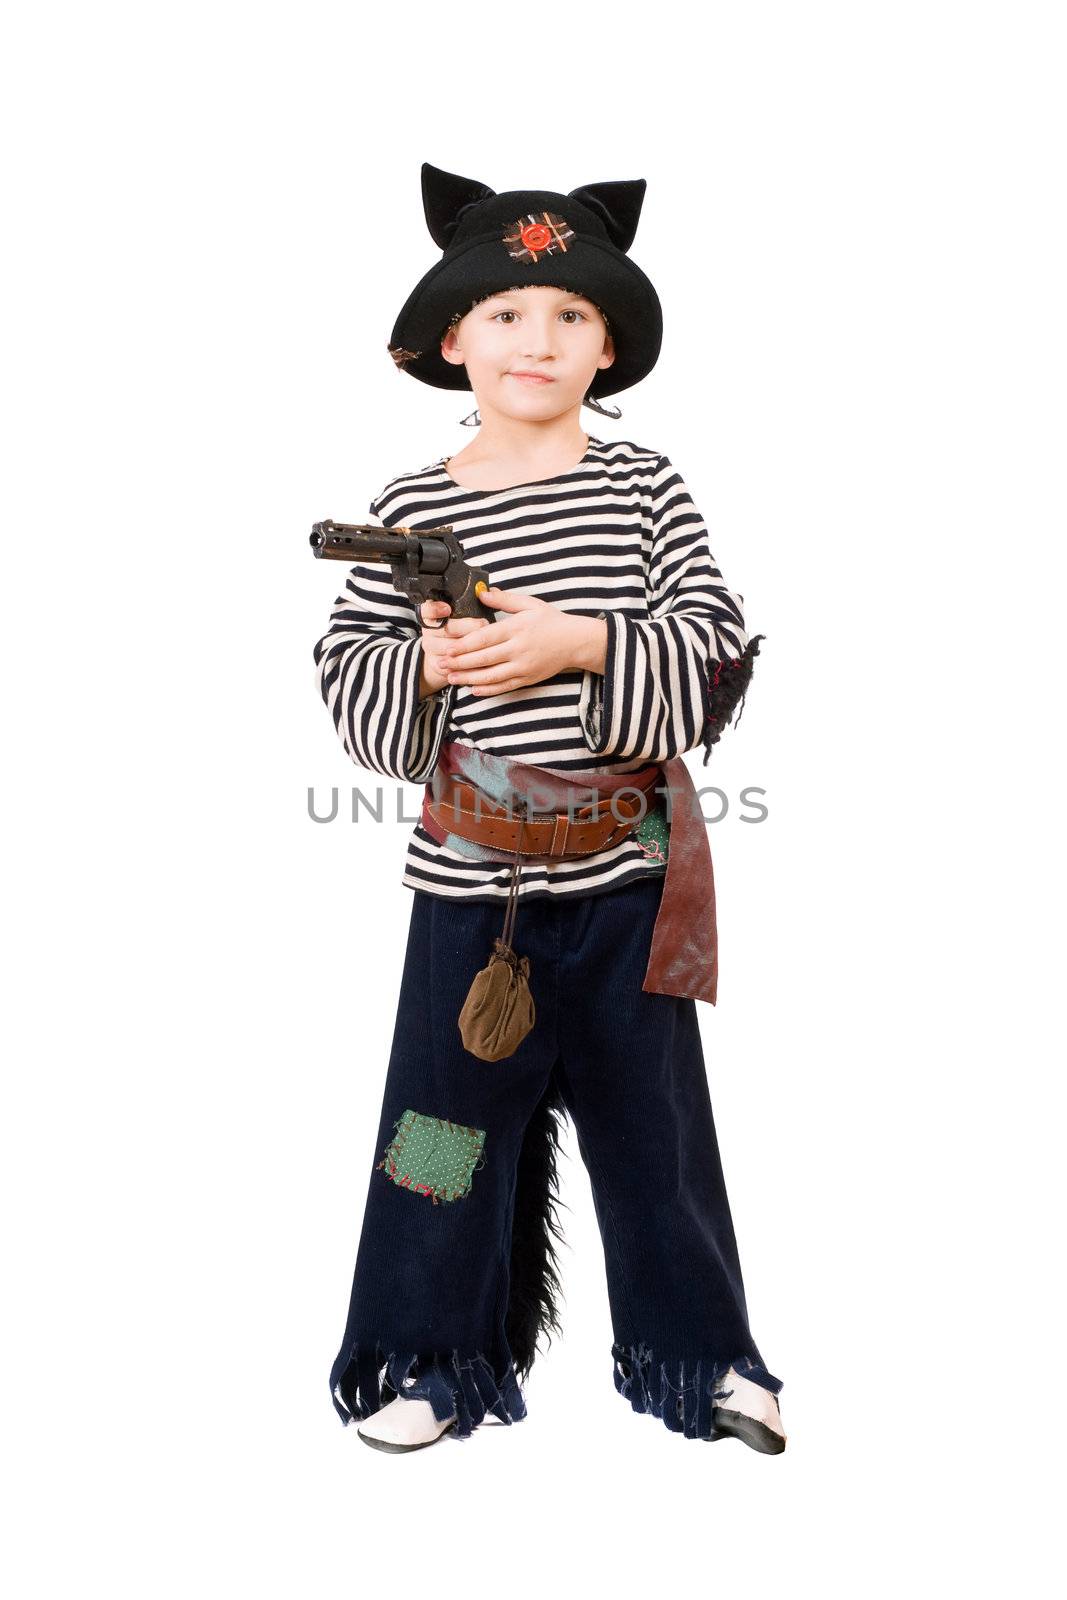 Boy with gun dressed as a pirate by acidgrey